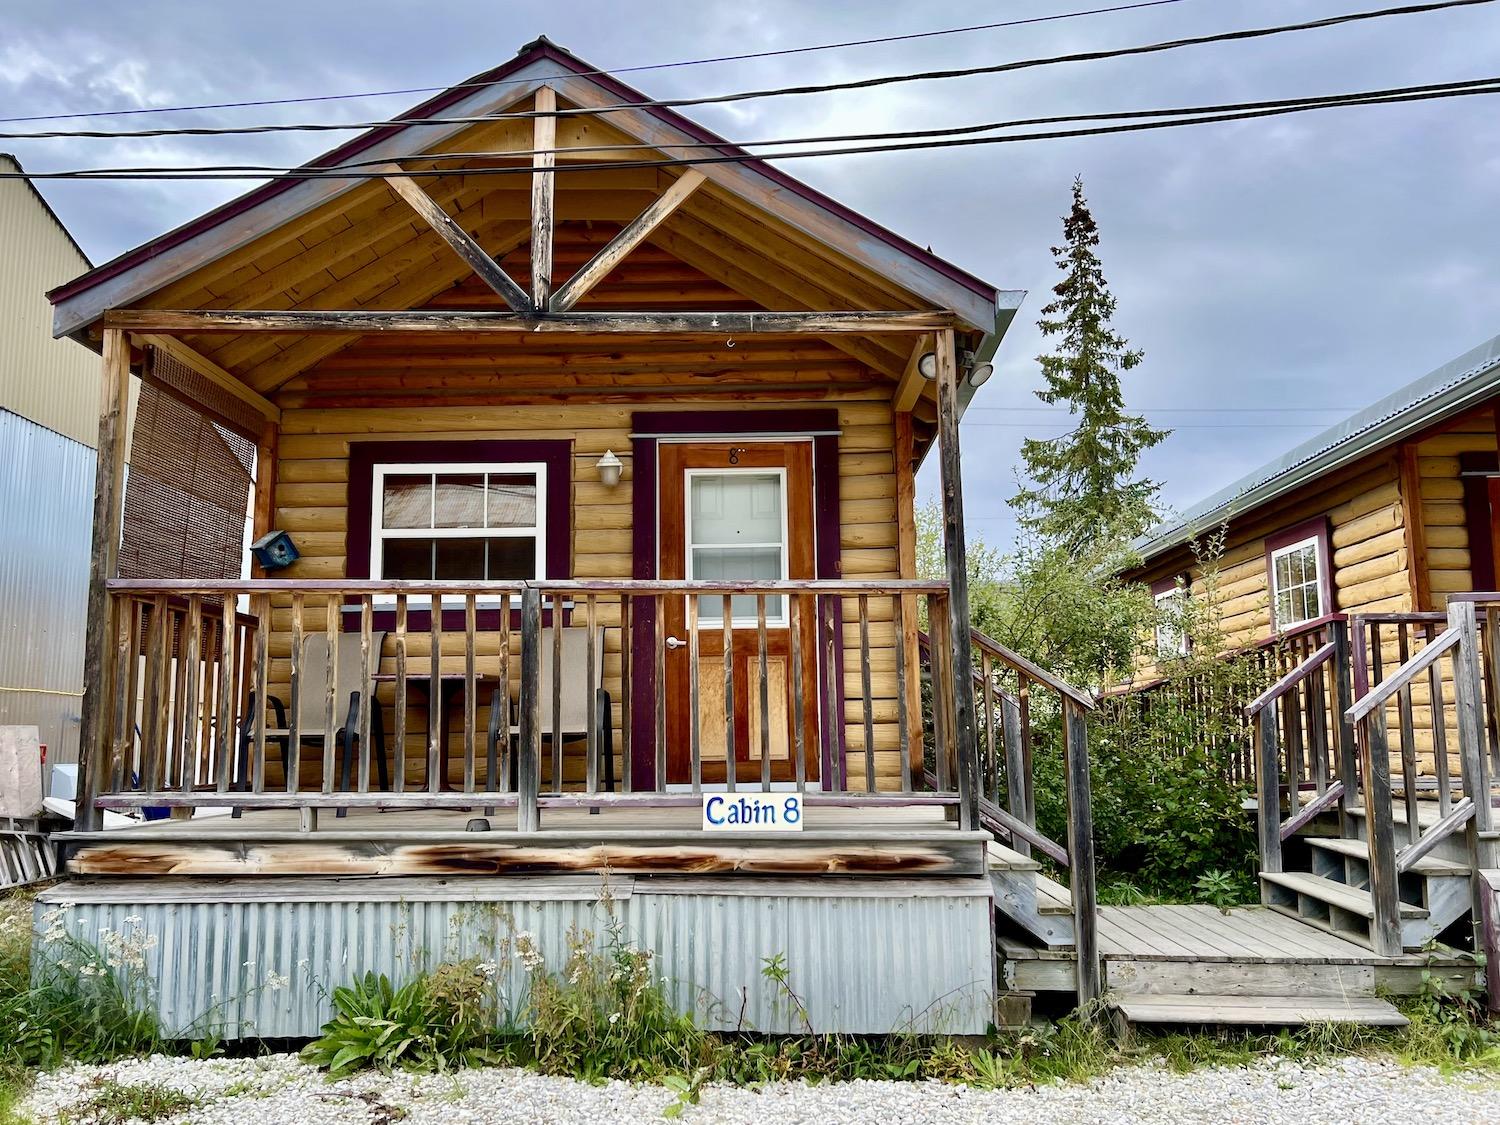 Klondike Kate's Cabins can be found in downtown Dawson City.